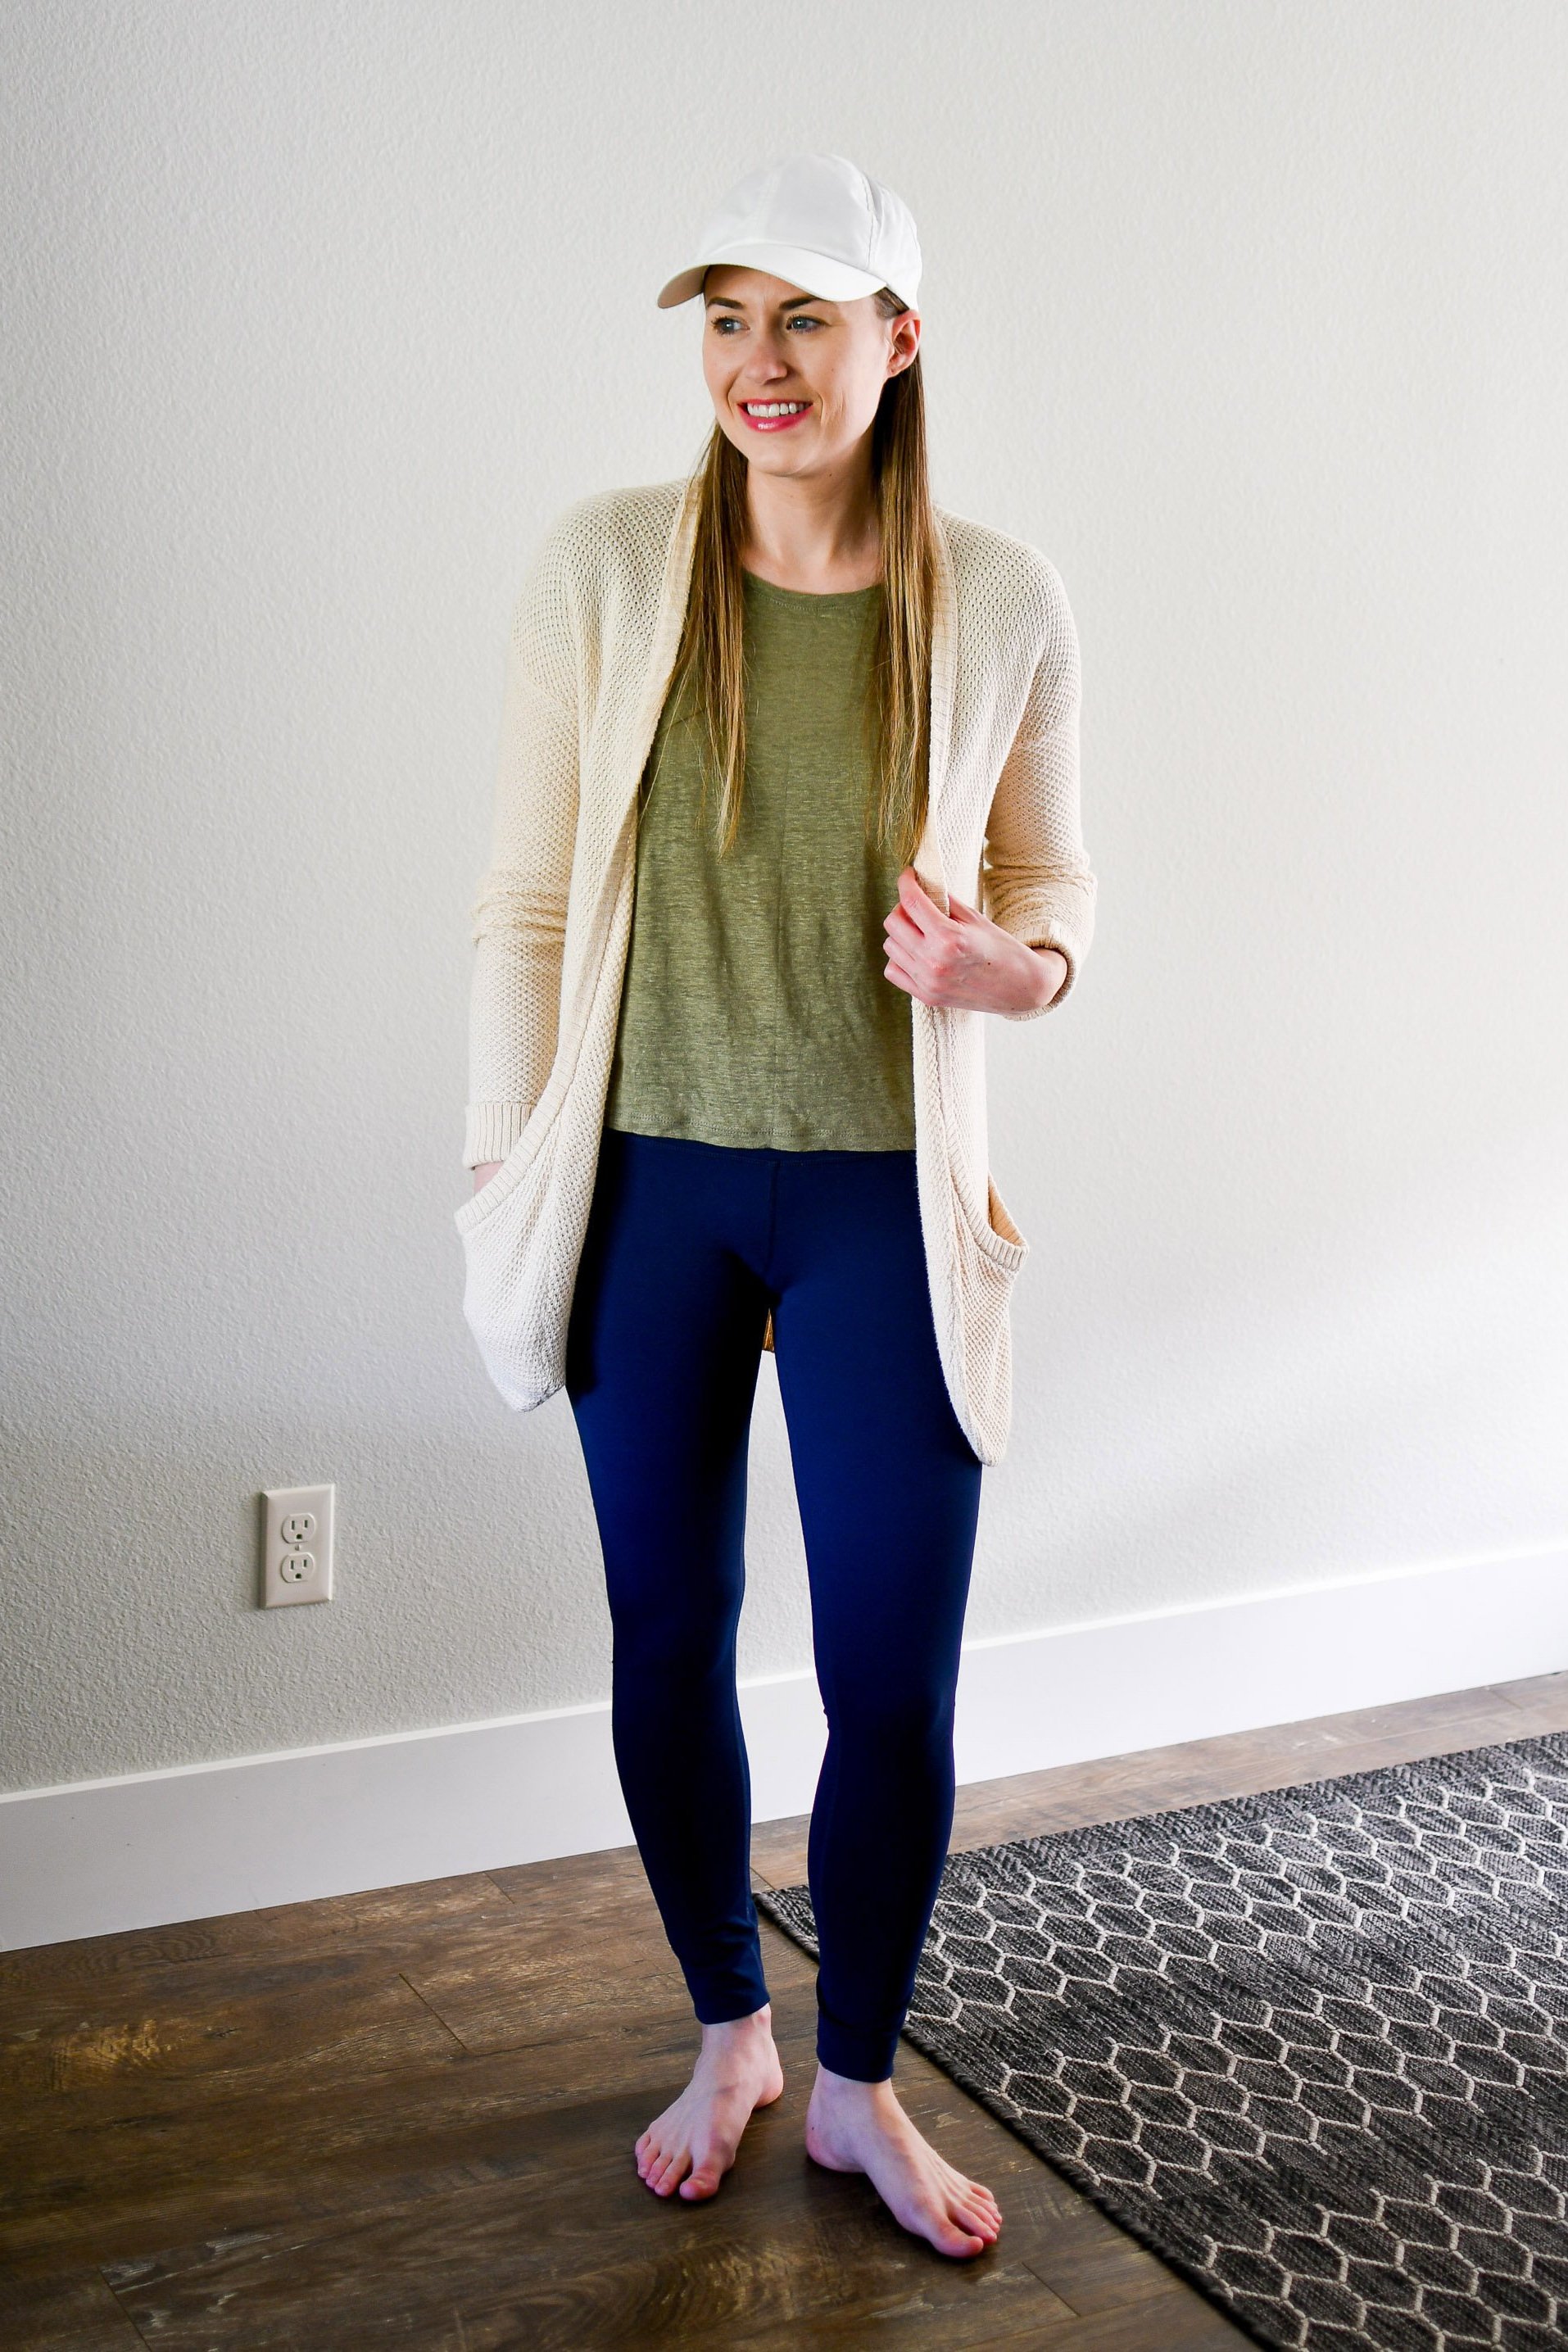 How to Wear a Long Cardigan (+ 20 Outfit Ideas!)